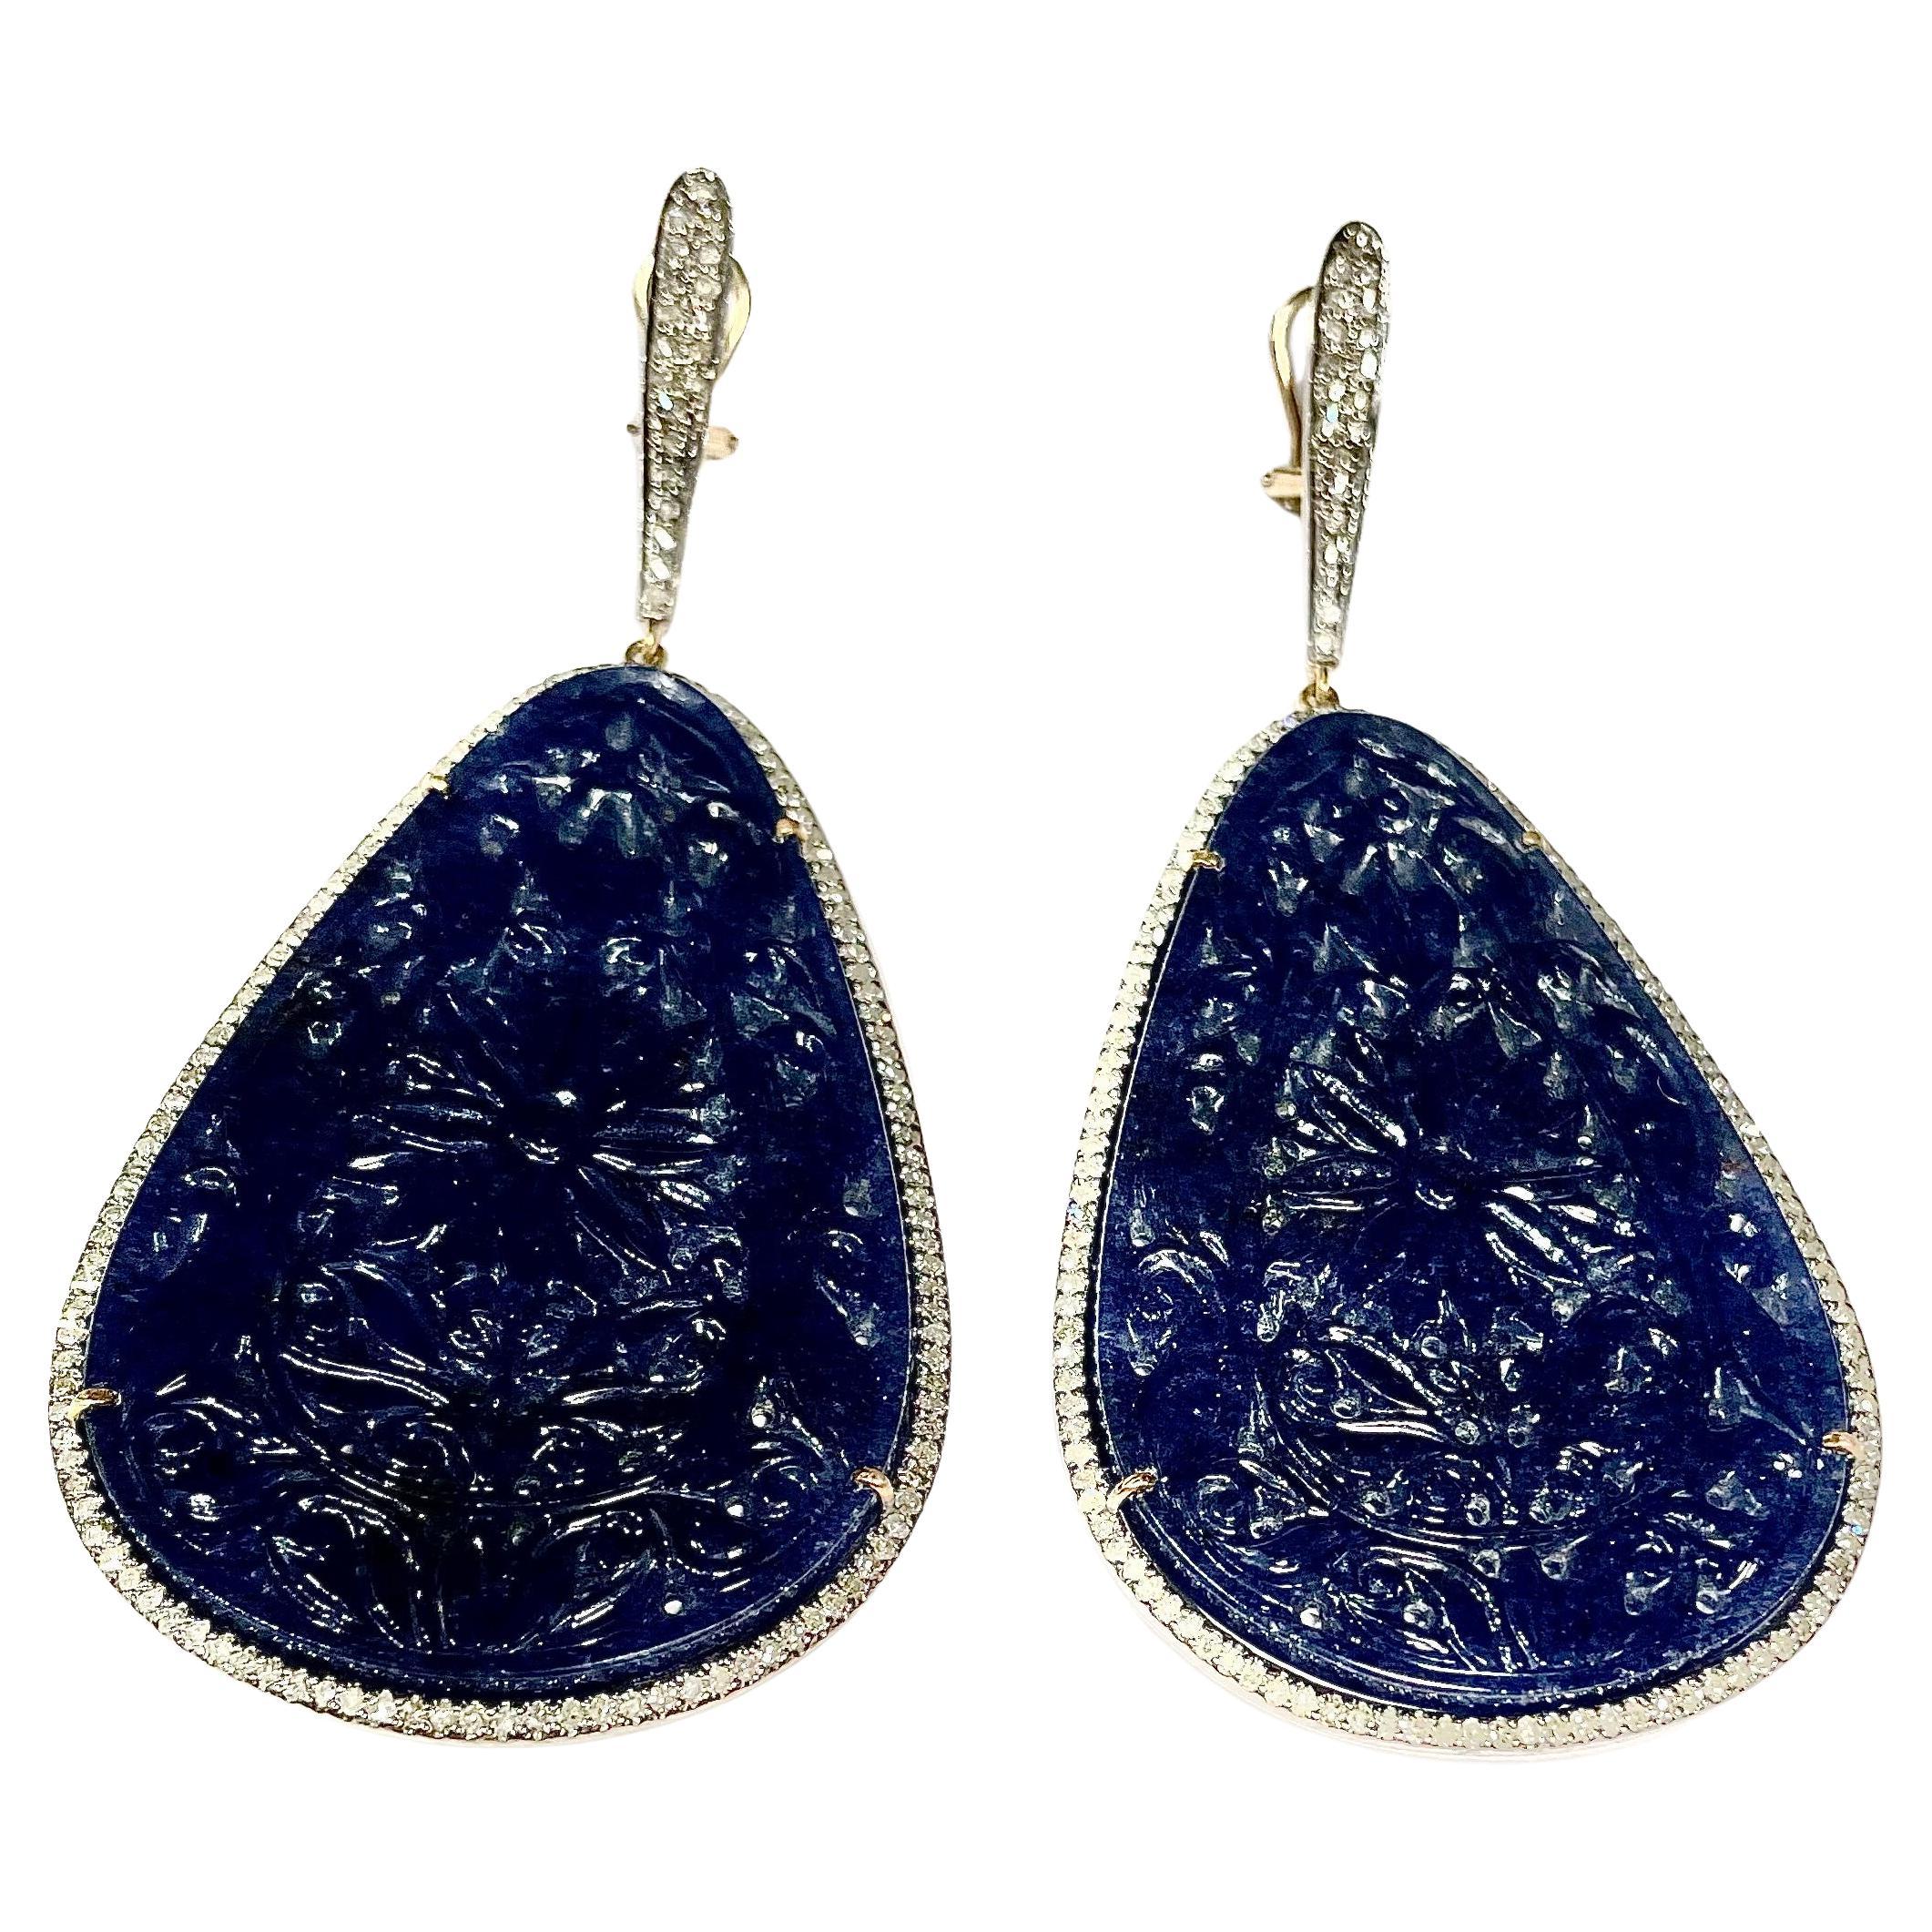 Carved Midnight Blue Onyx 105 Carats with Pave Diamonds Earrings For Sale